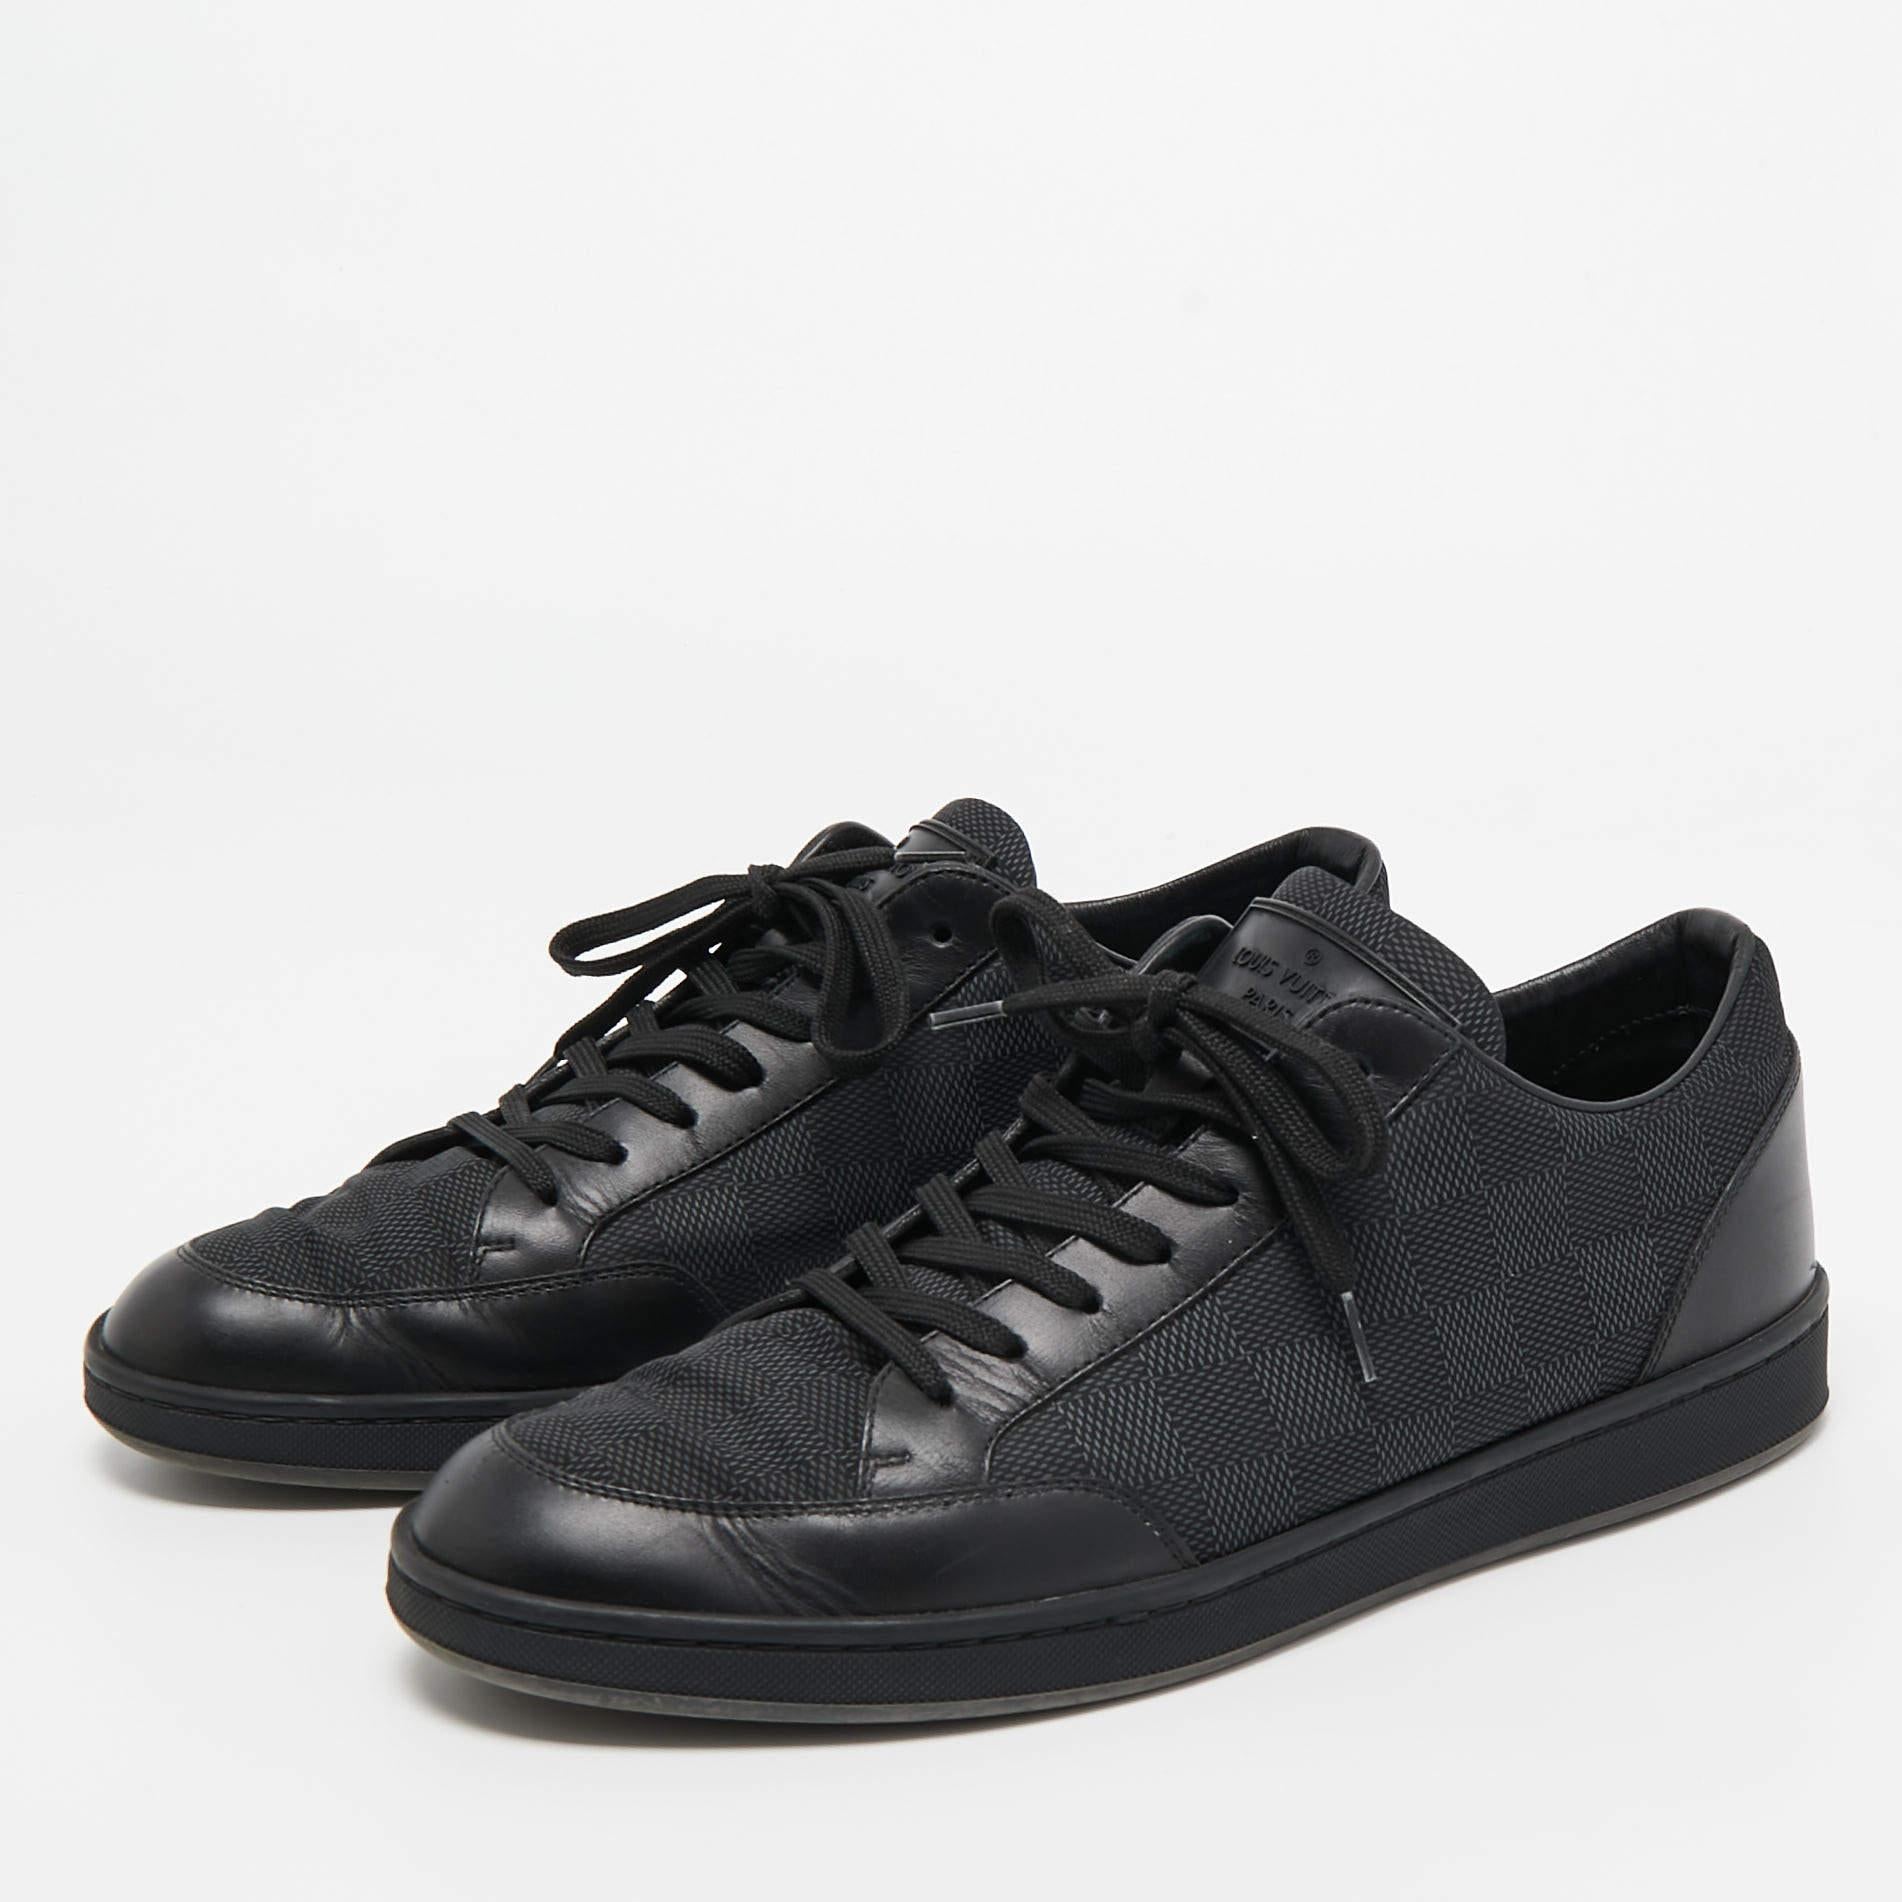 Elevate your footwear game with these LV black sneakers. Combining high-end aesthetics and unmatched comfort, these sneakers are a symbol of modern luxury and impeccable taste.

